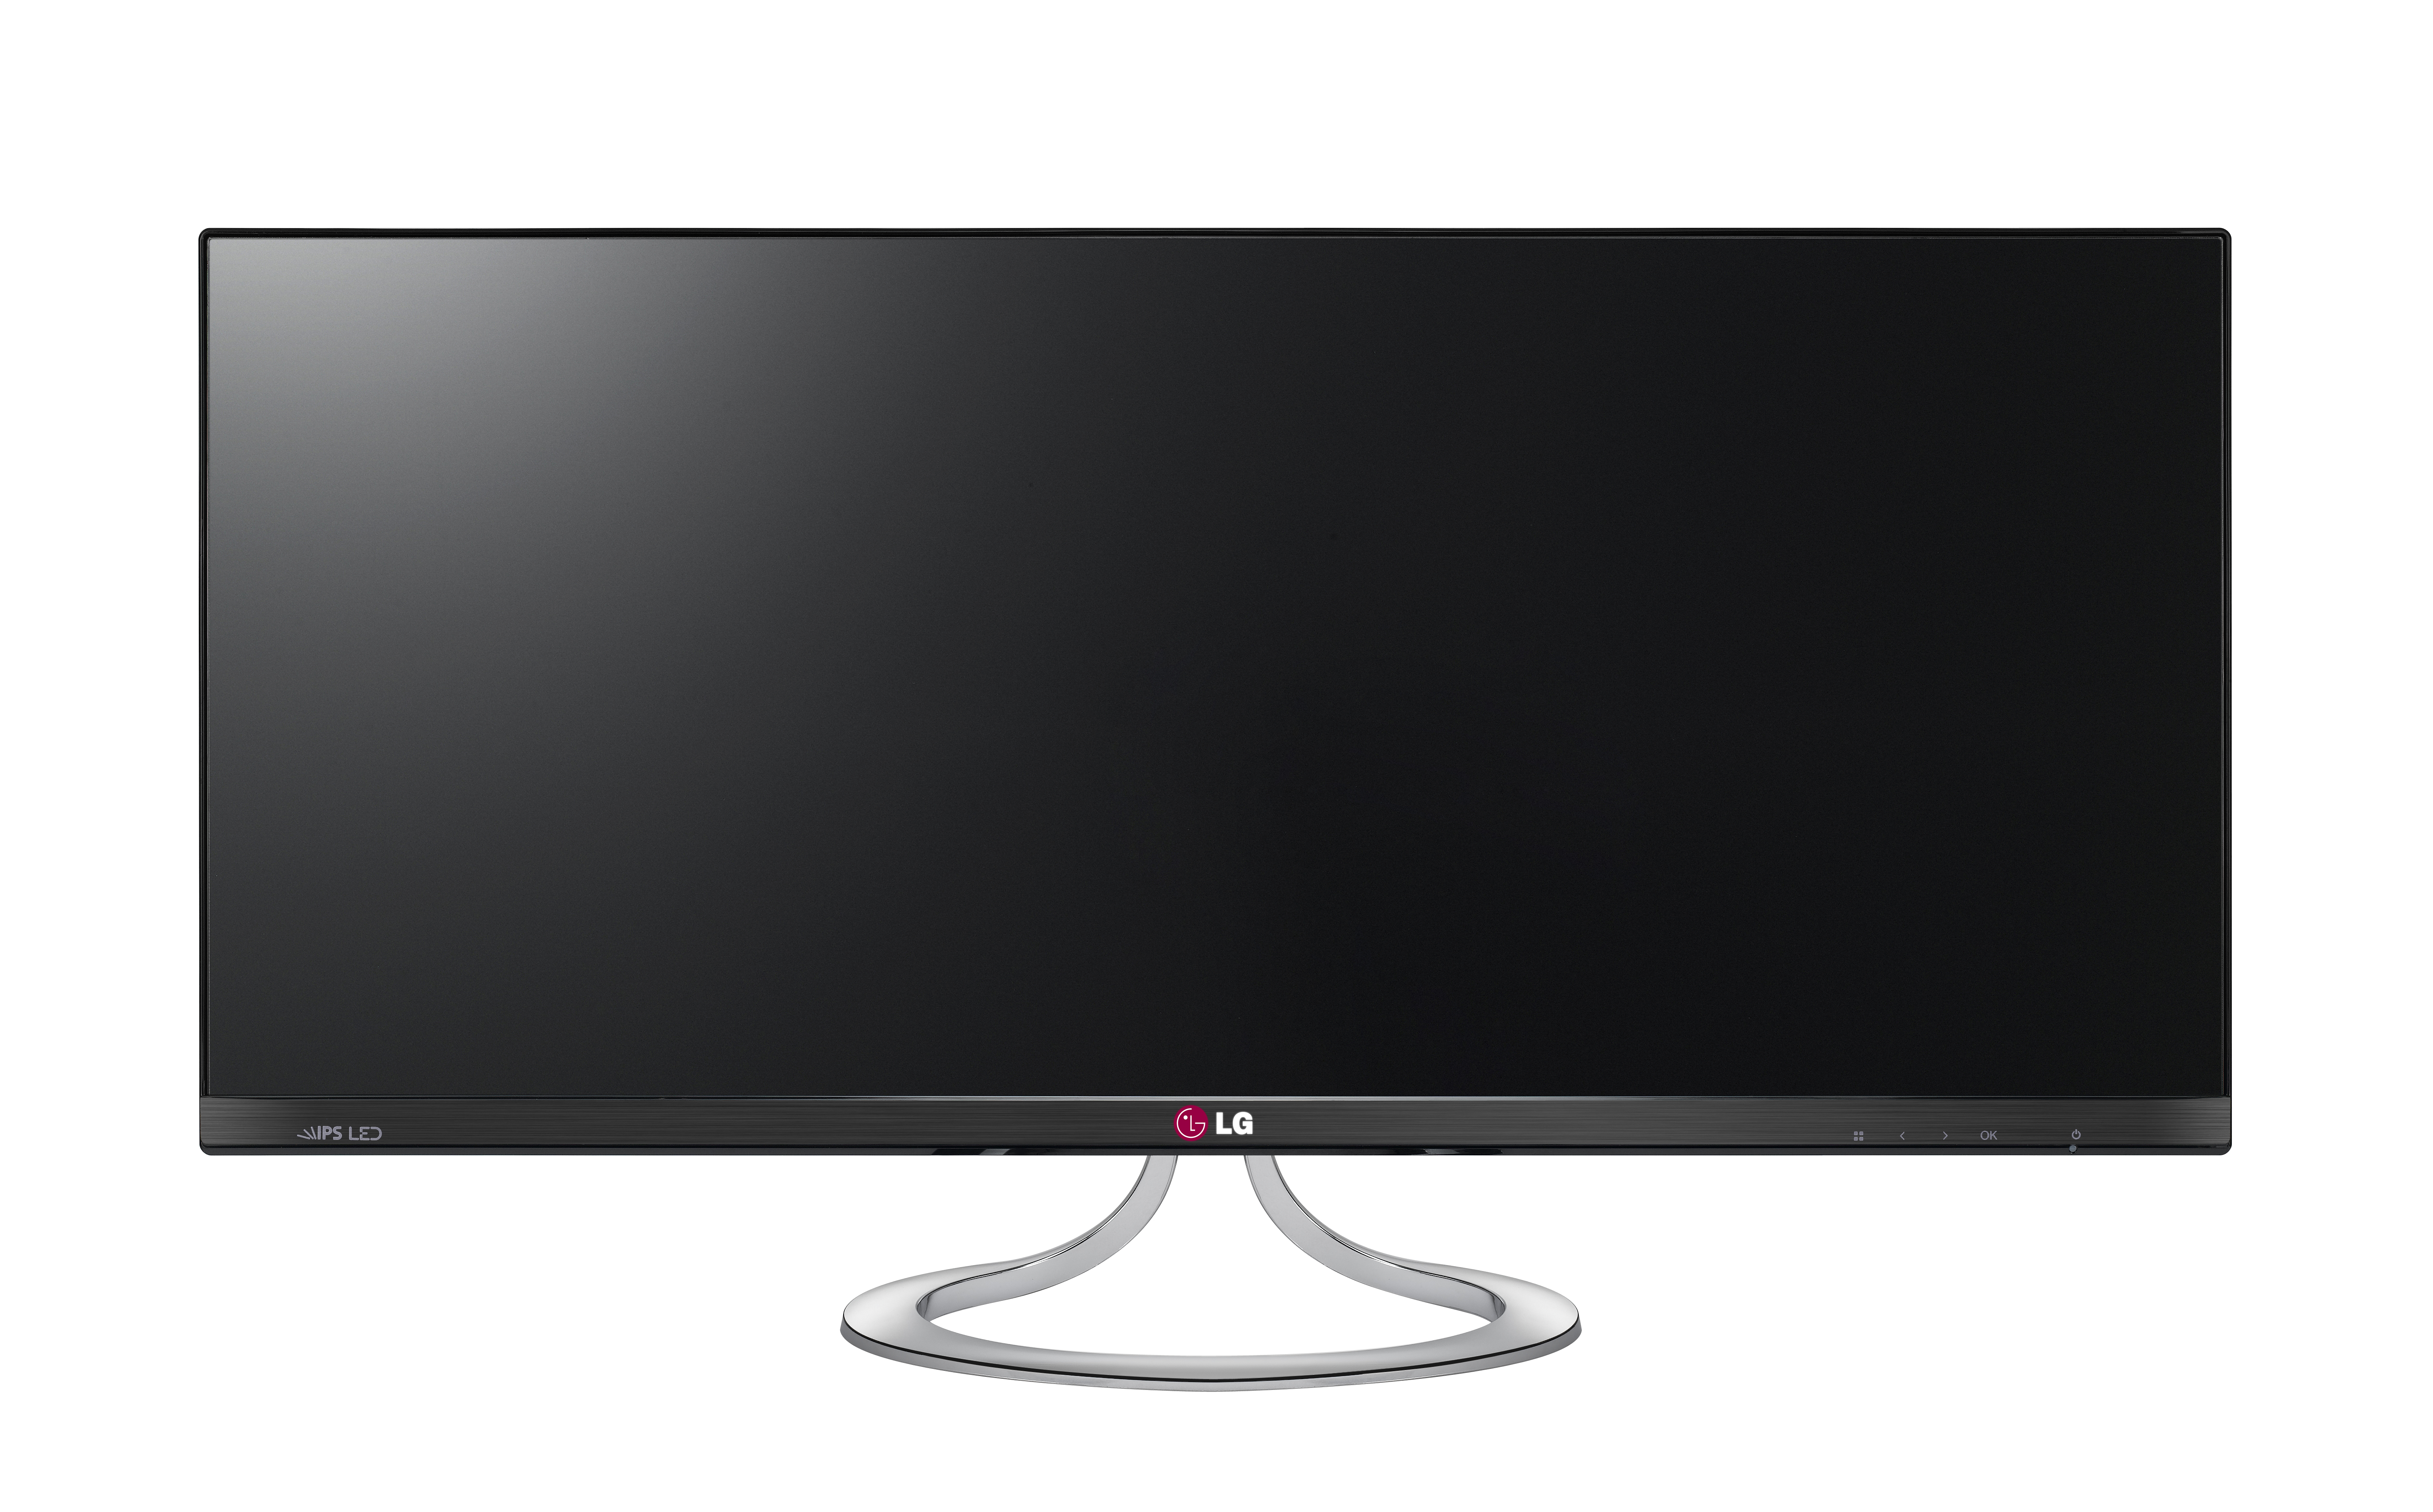 A front view of LG UltraWide monitor model EA93